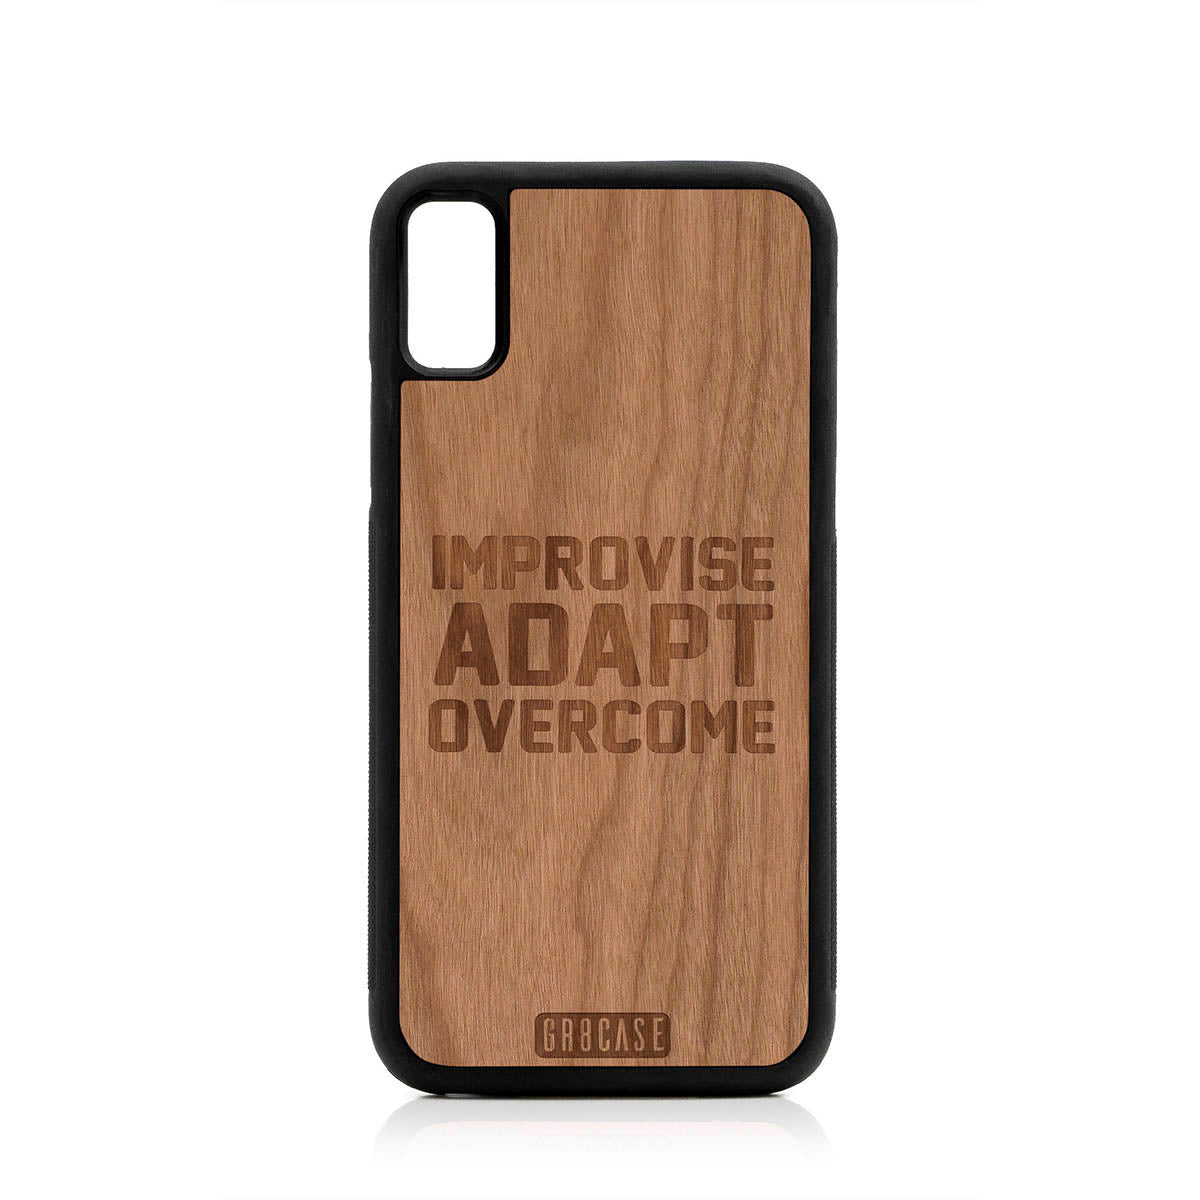 Improvise Adapt Overcome Design Wood Case For iPhone XR